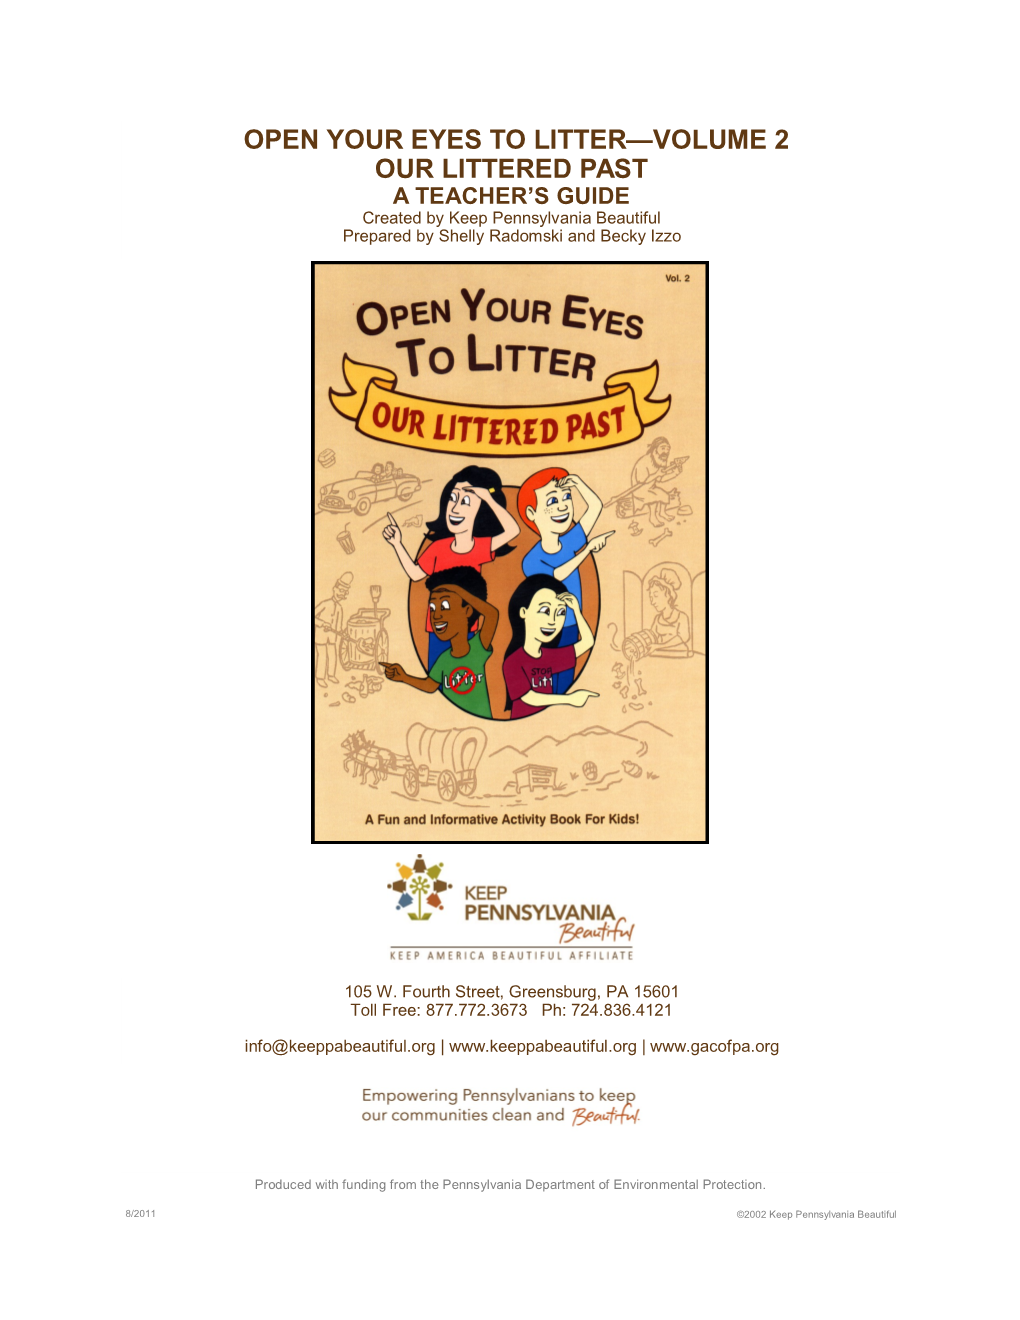 OPEN YOUR EYES to LITTER—VOLUME 2 OUR LITTERED PAST a TEACHER’S GUIDE Created by Keep Pennsylvania Beautiful Prepared by Shelly Radomski and Becky Izzo